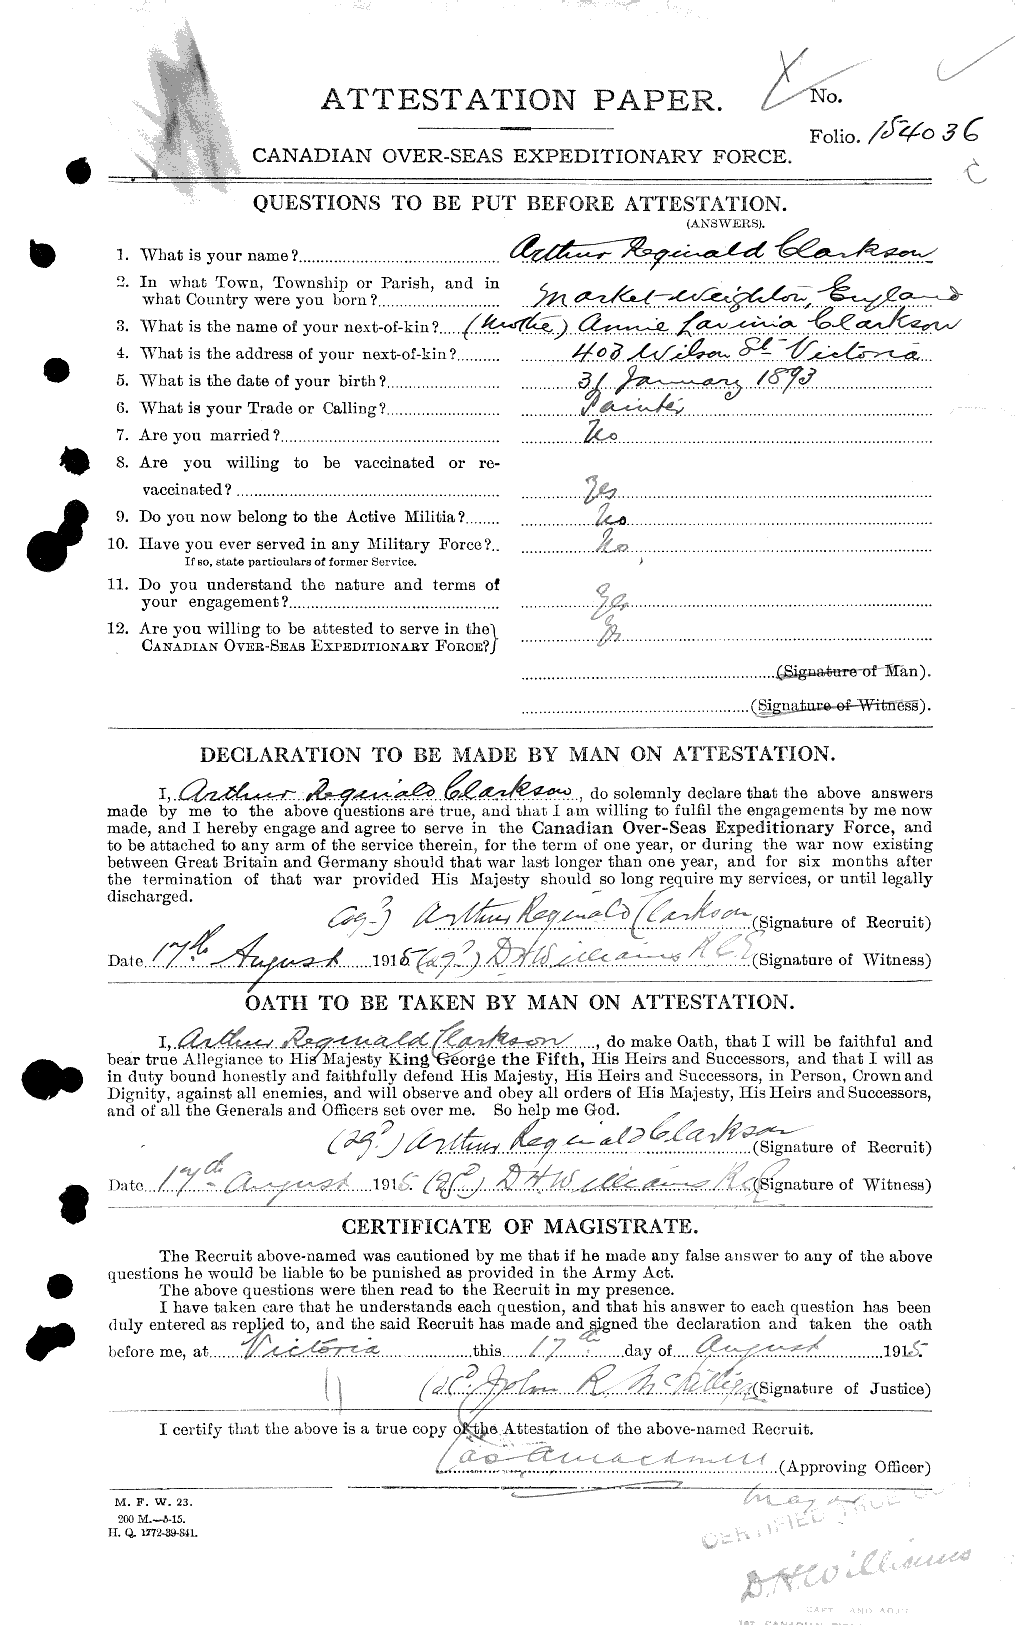 Personnel Records of the First World War - CEF 023618a